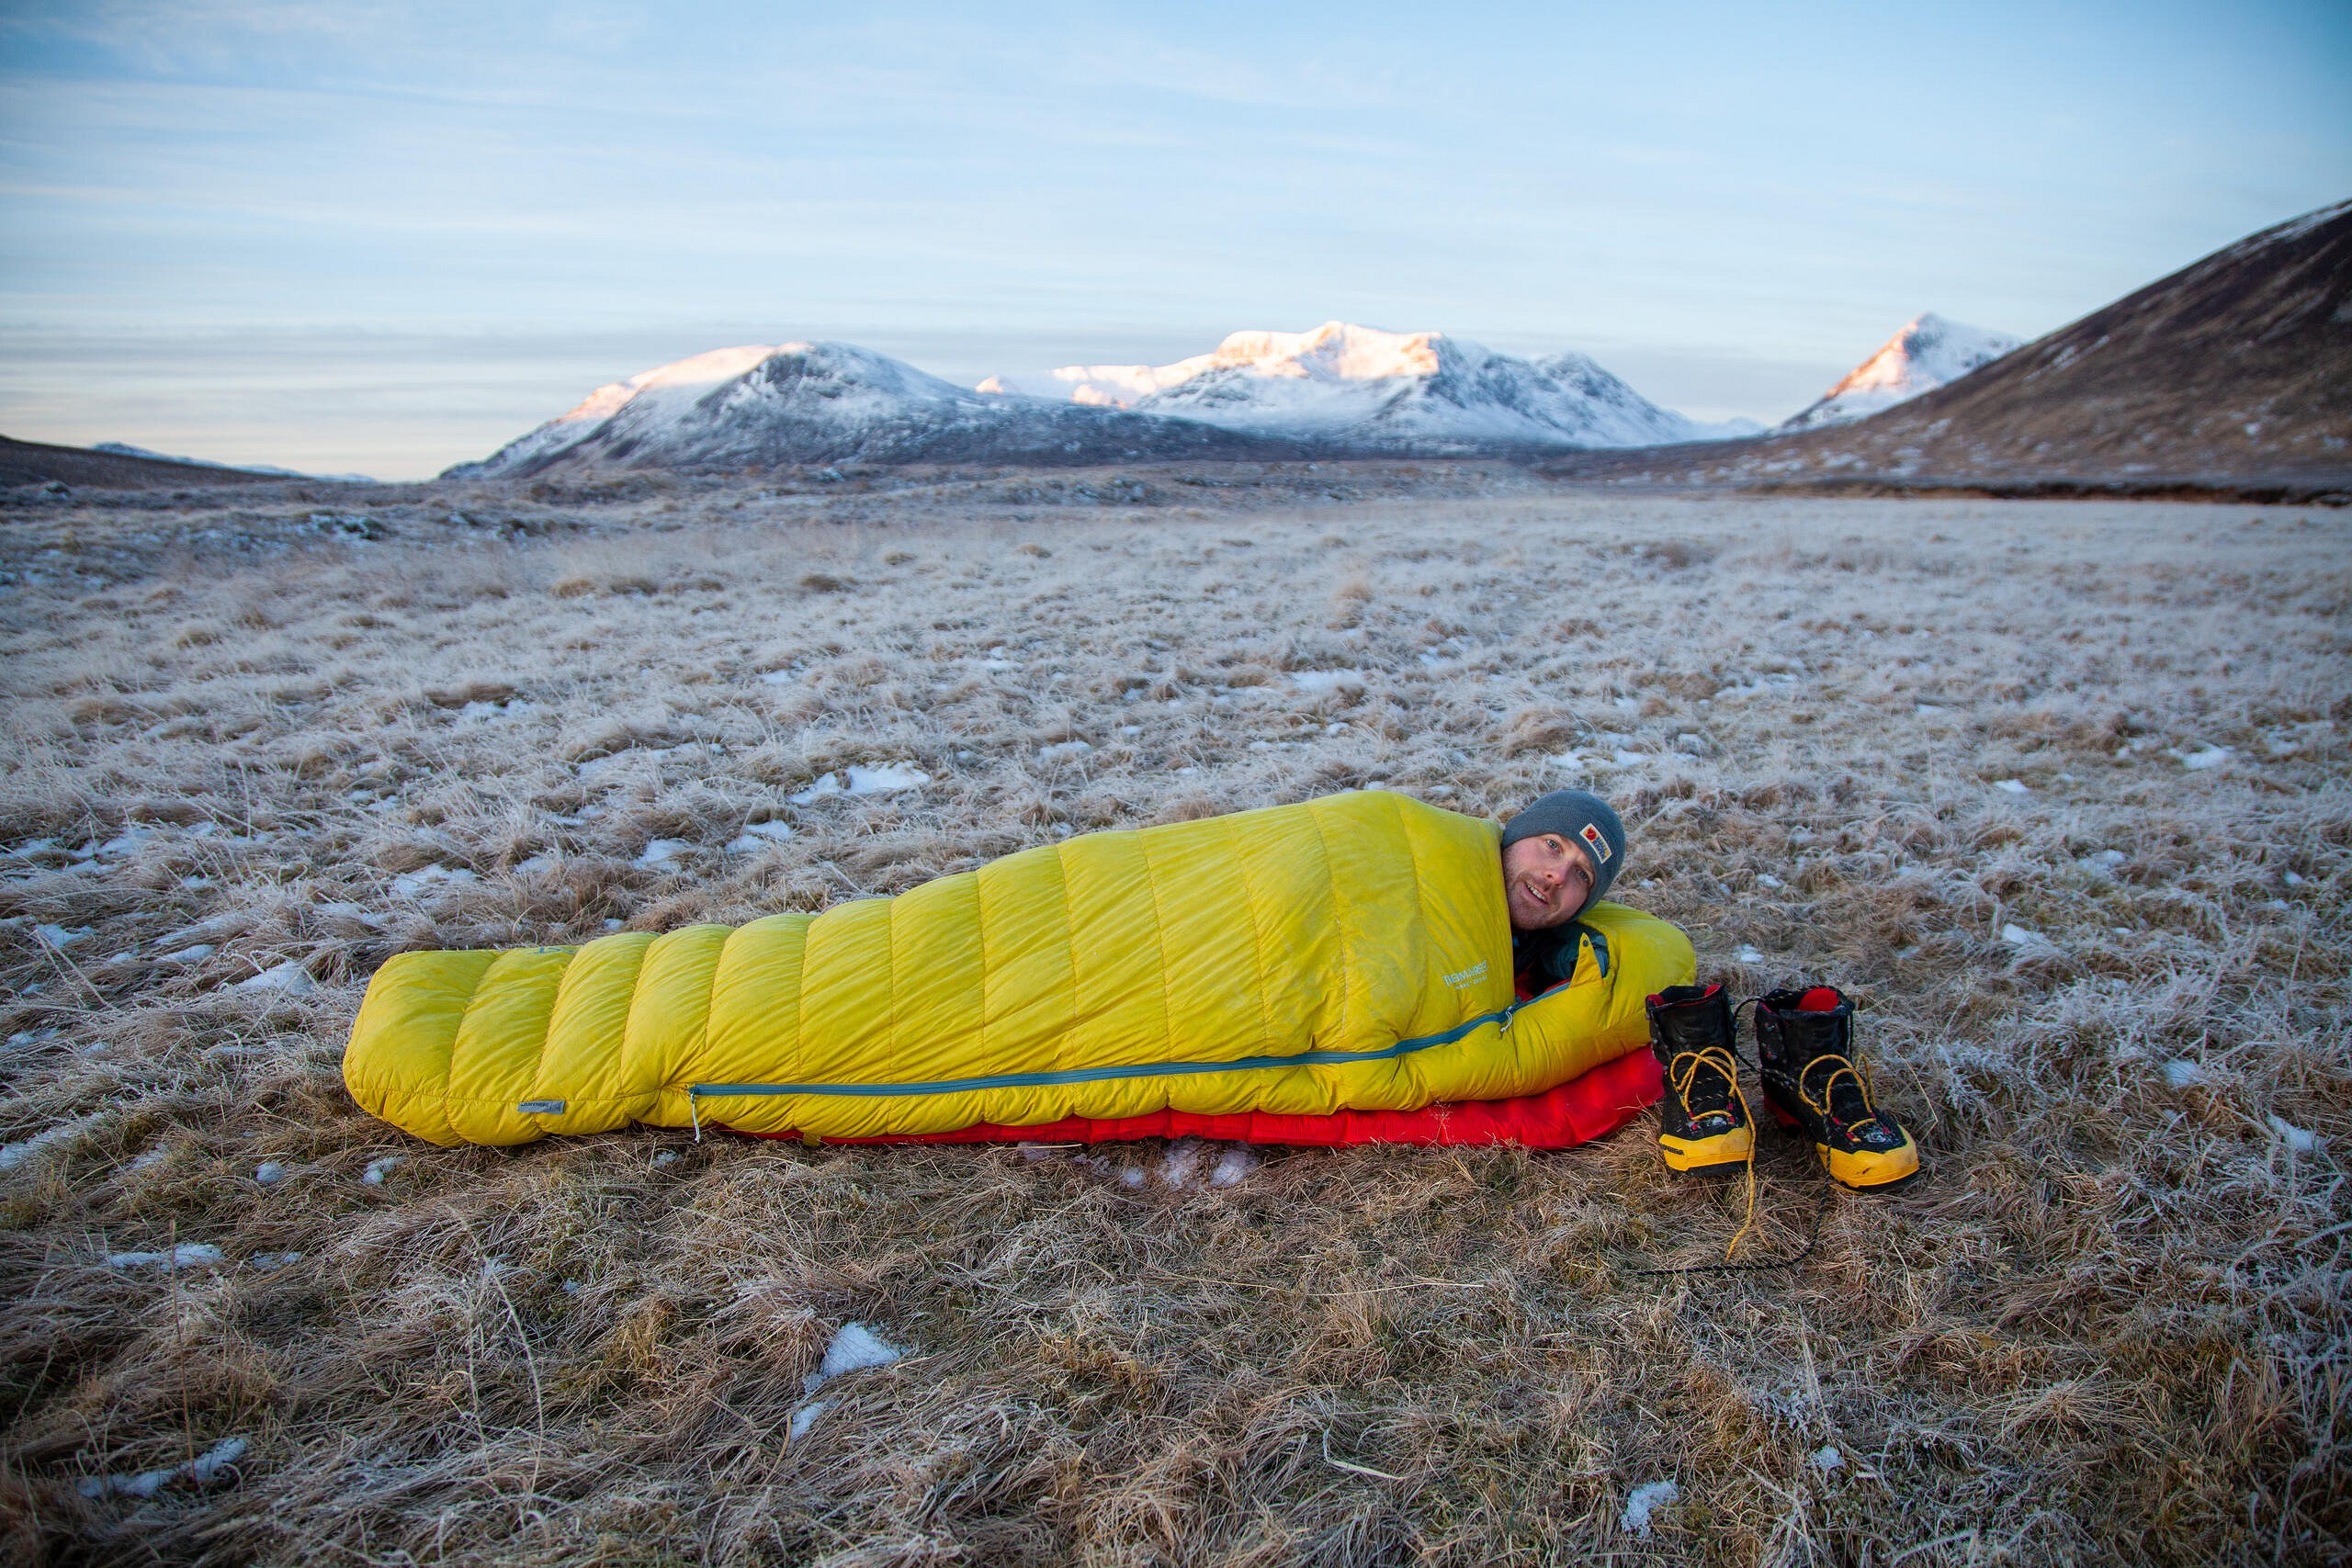 A few extra insulating layers necessary when temps dropped down to -13C!  © UKC Gear